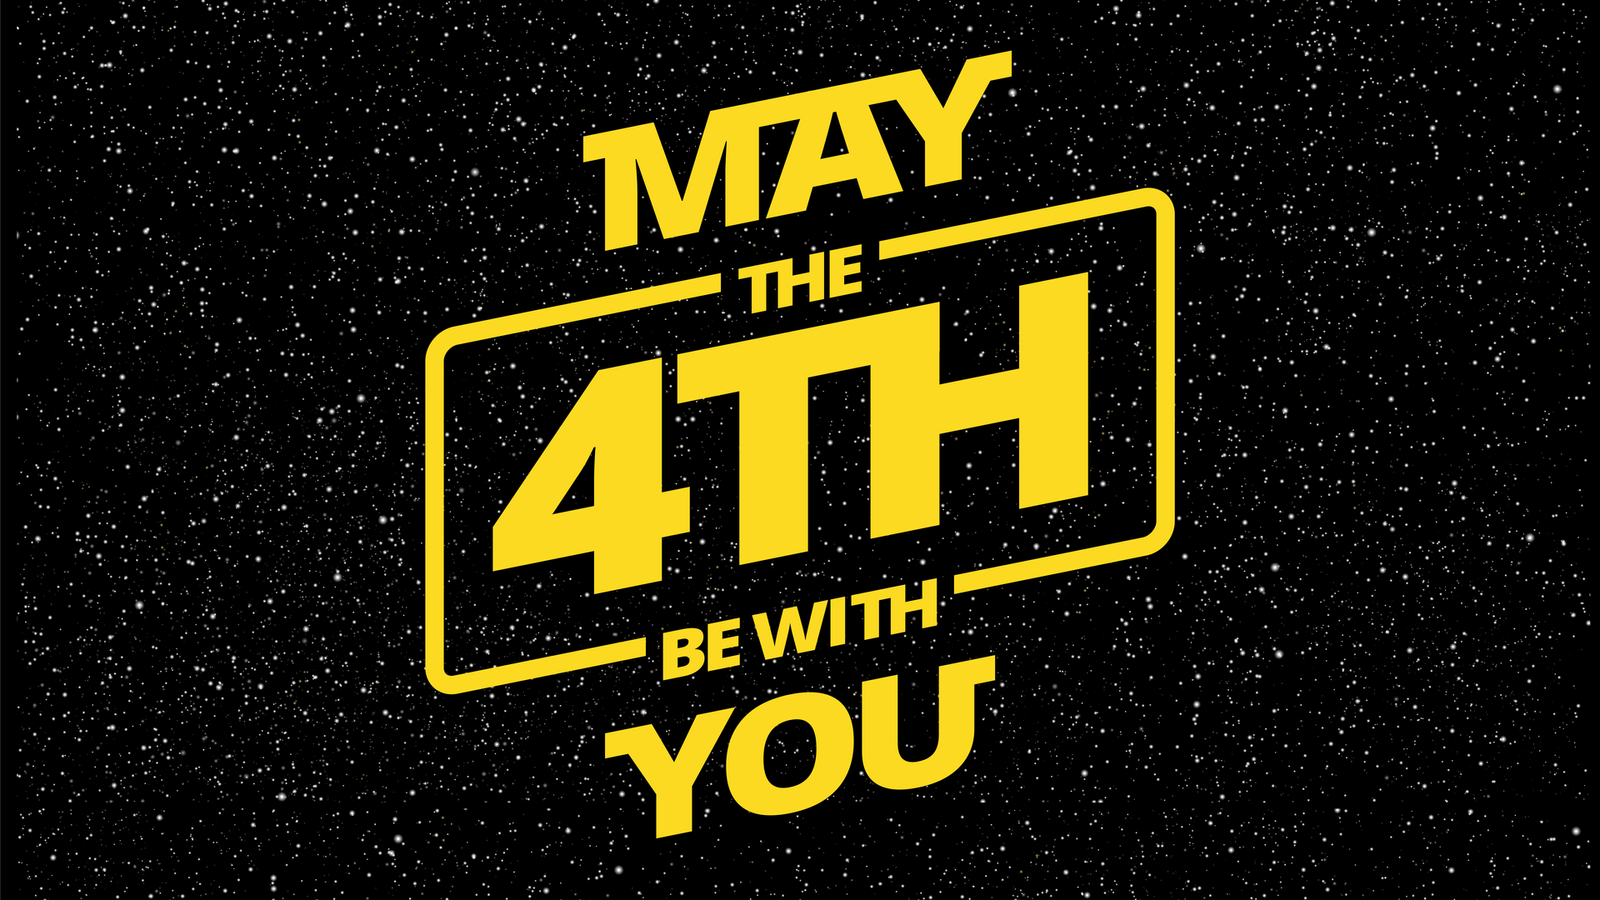 May the 4th be with you graphic against starry background